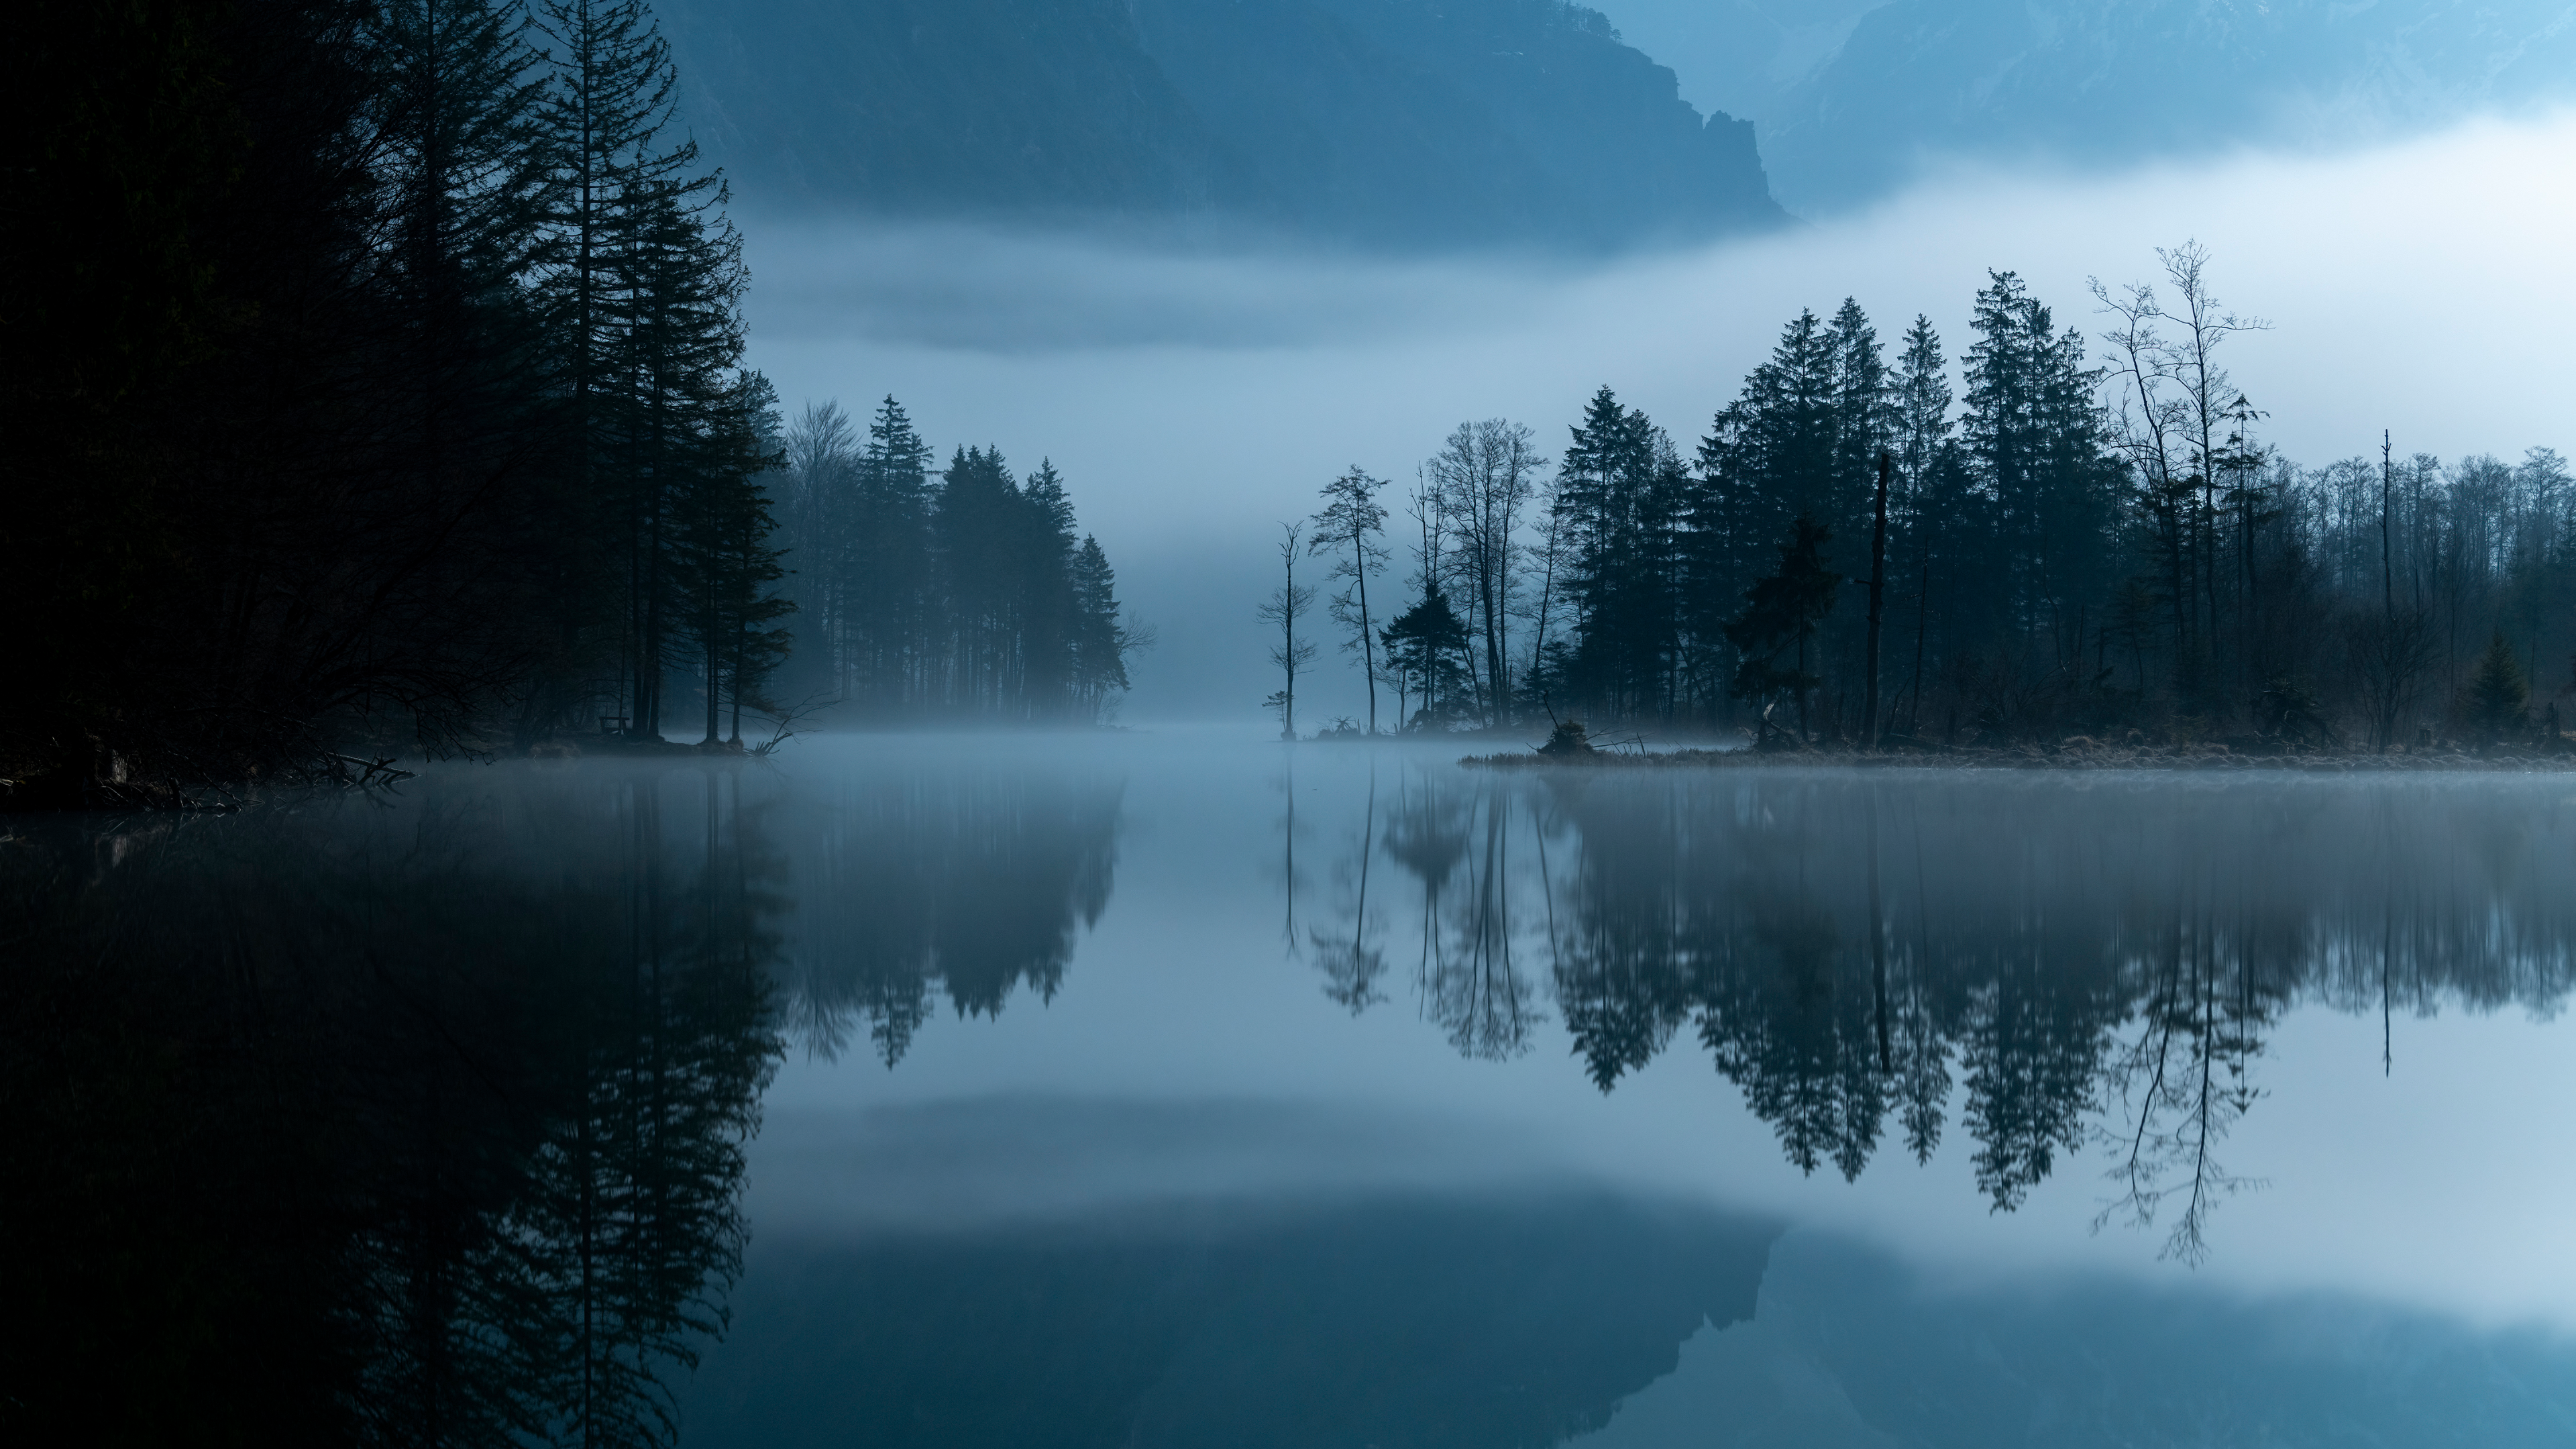 General 3840x2160 nature landscape trees mountains river water reflection long exposure mist dark low light